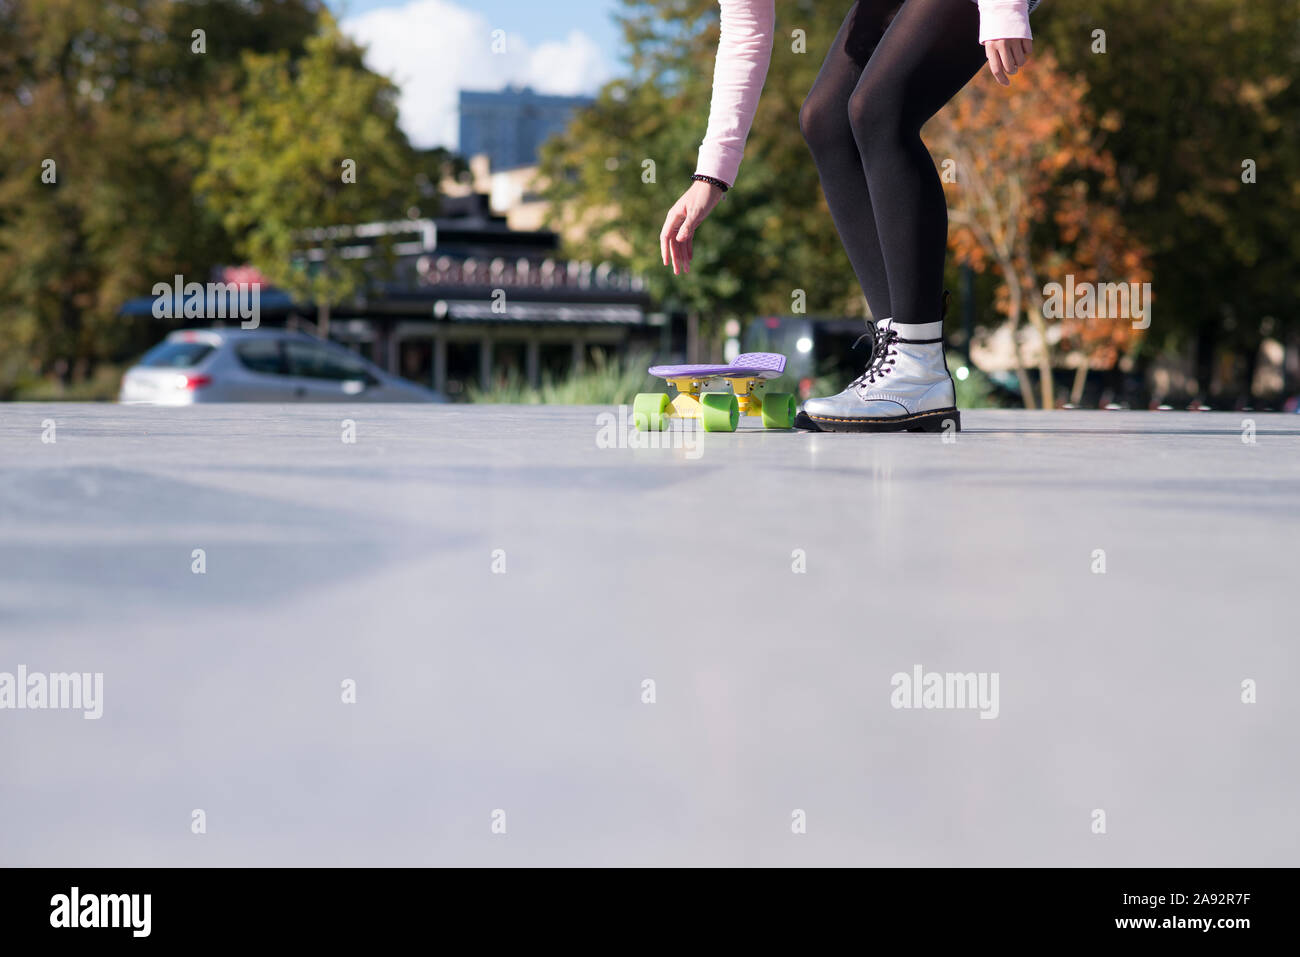 Woman skateboarding, low section Stock Photo